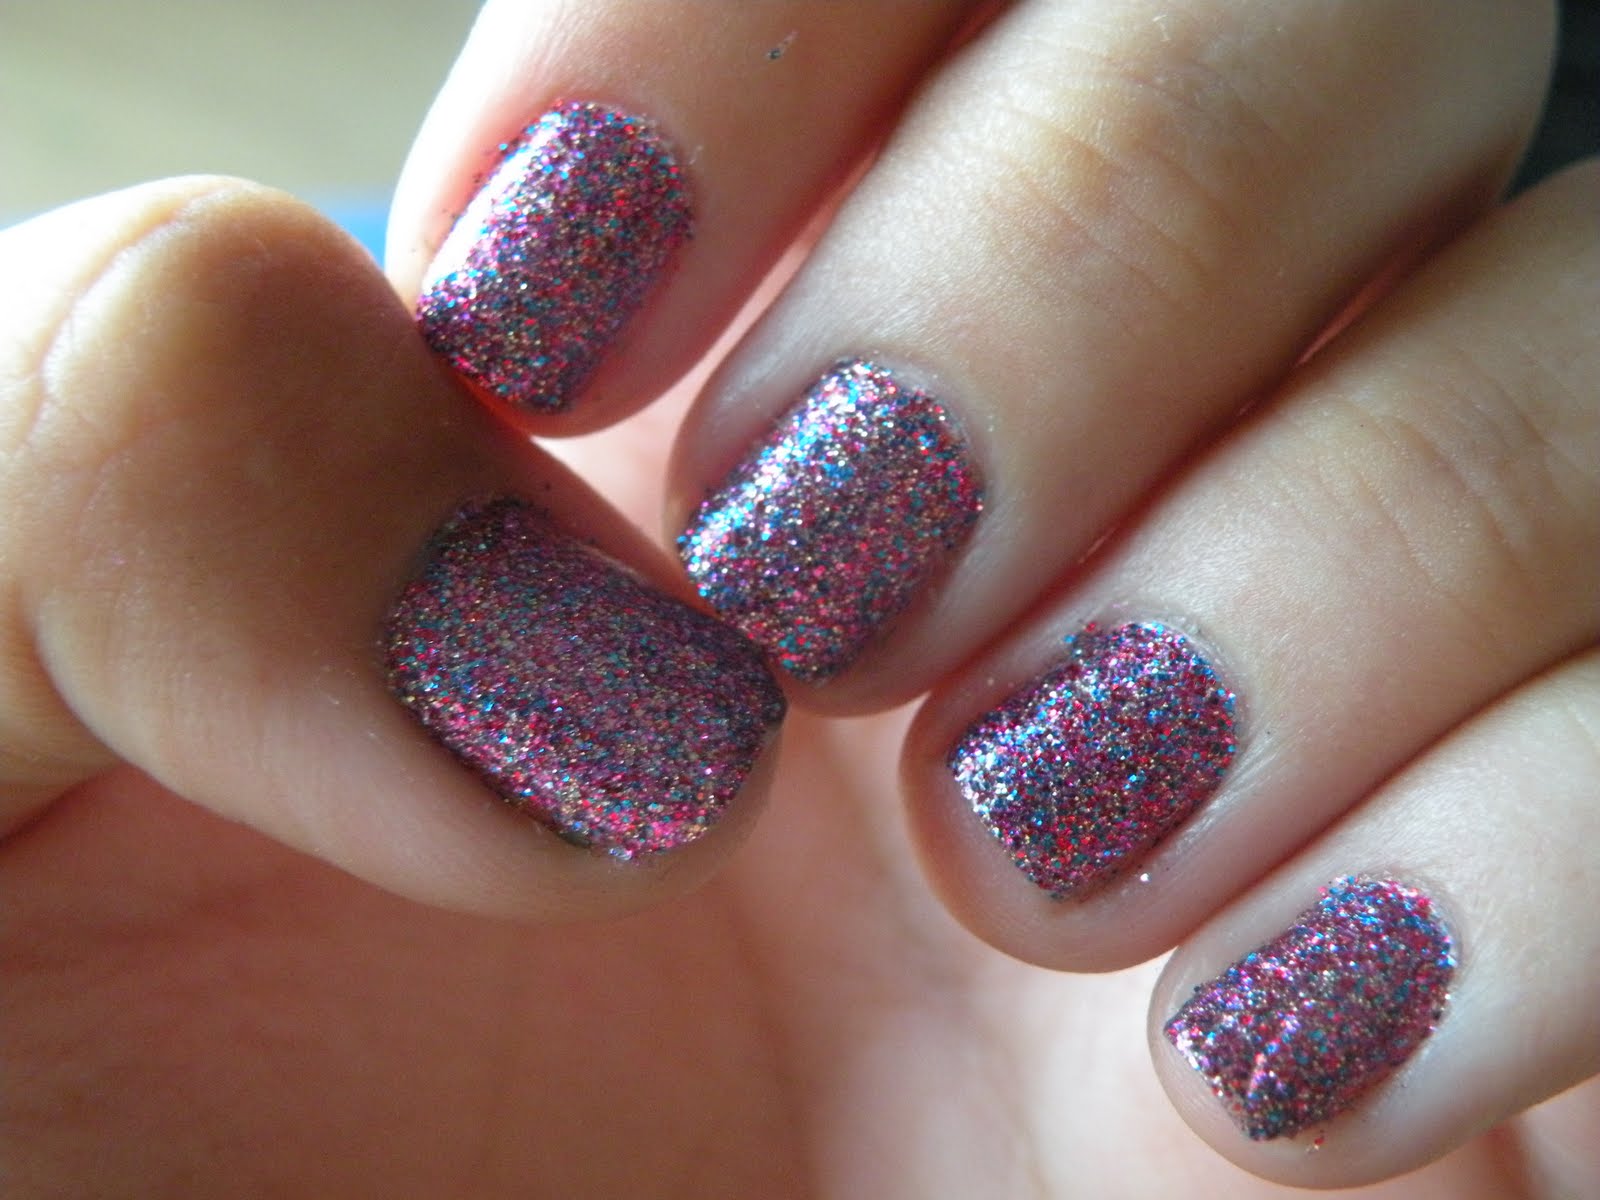 2. Pink Glitter Nails with Gold Foil Nail Art - wide 9